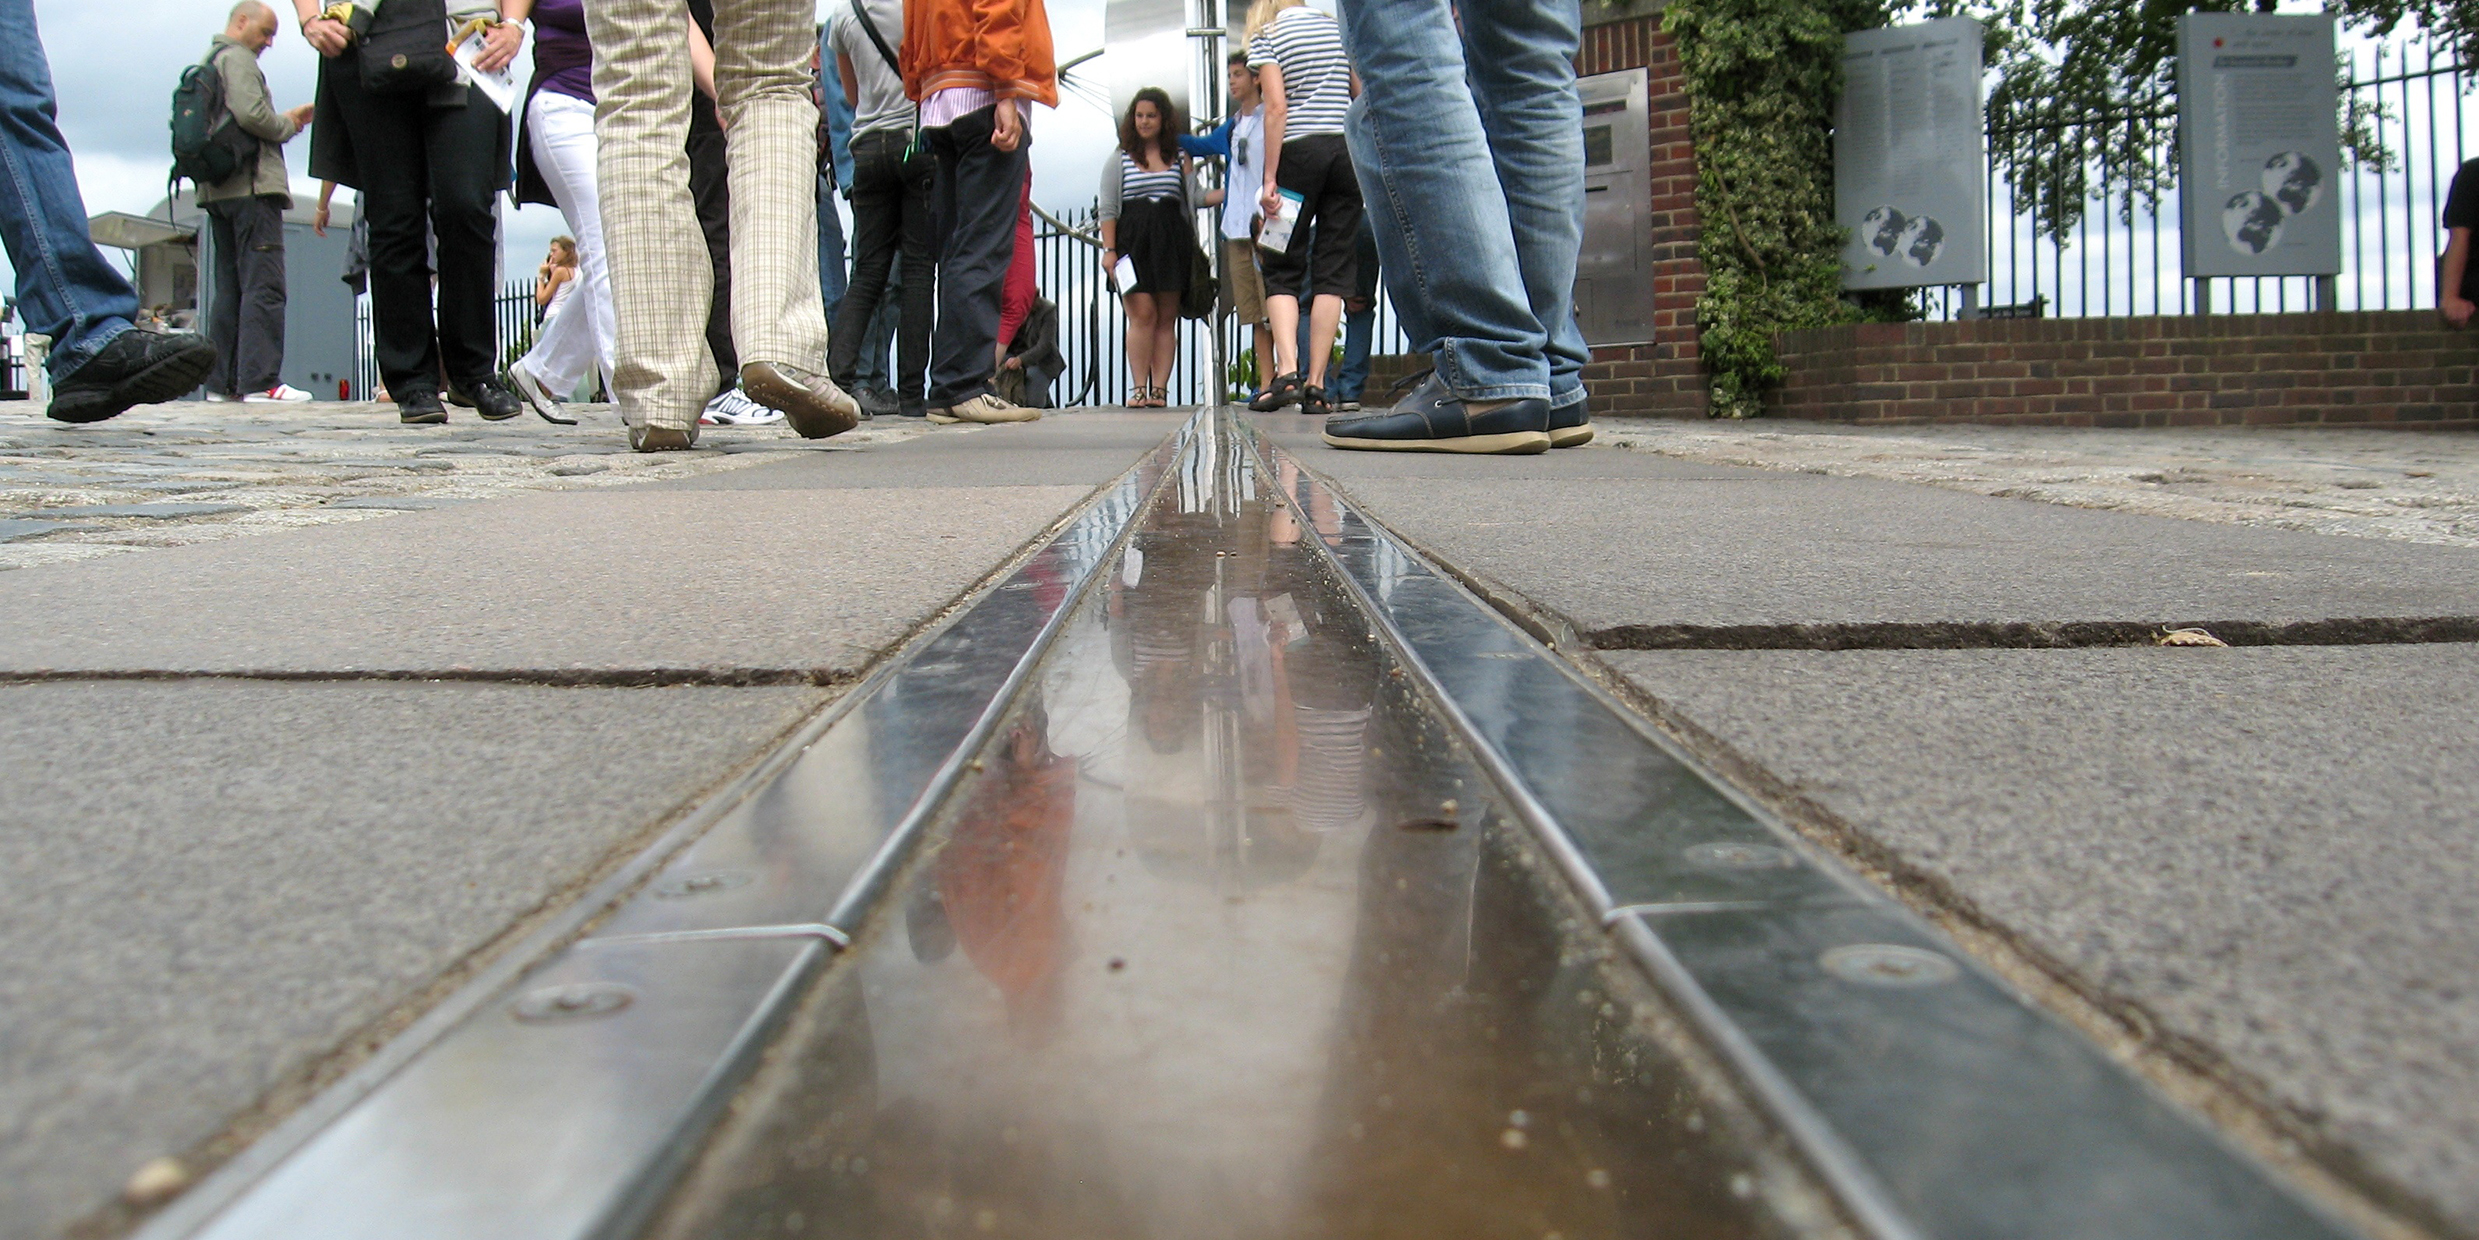 Image of a line of longitude marked in pavement with tourists nearby